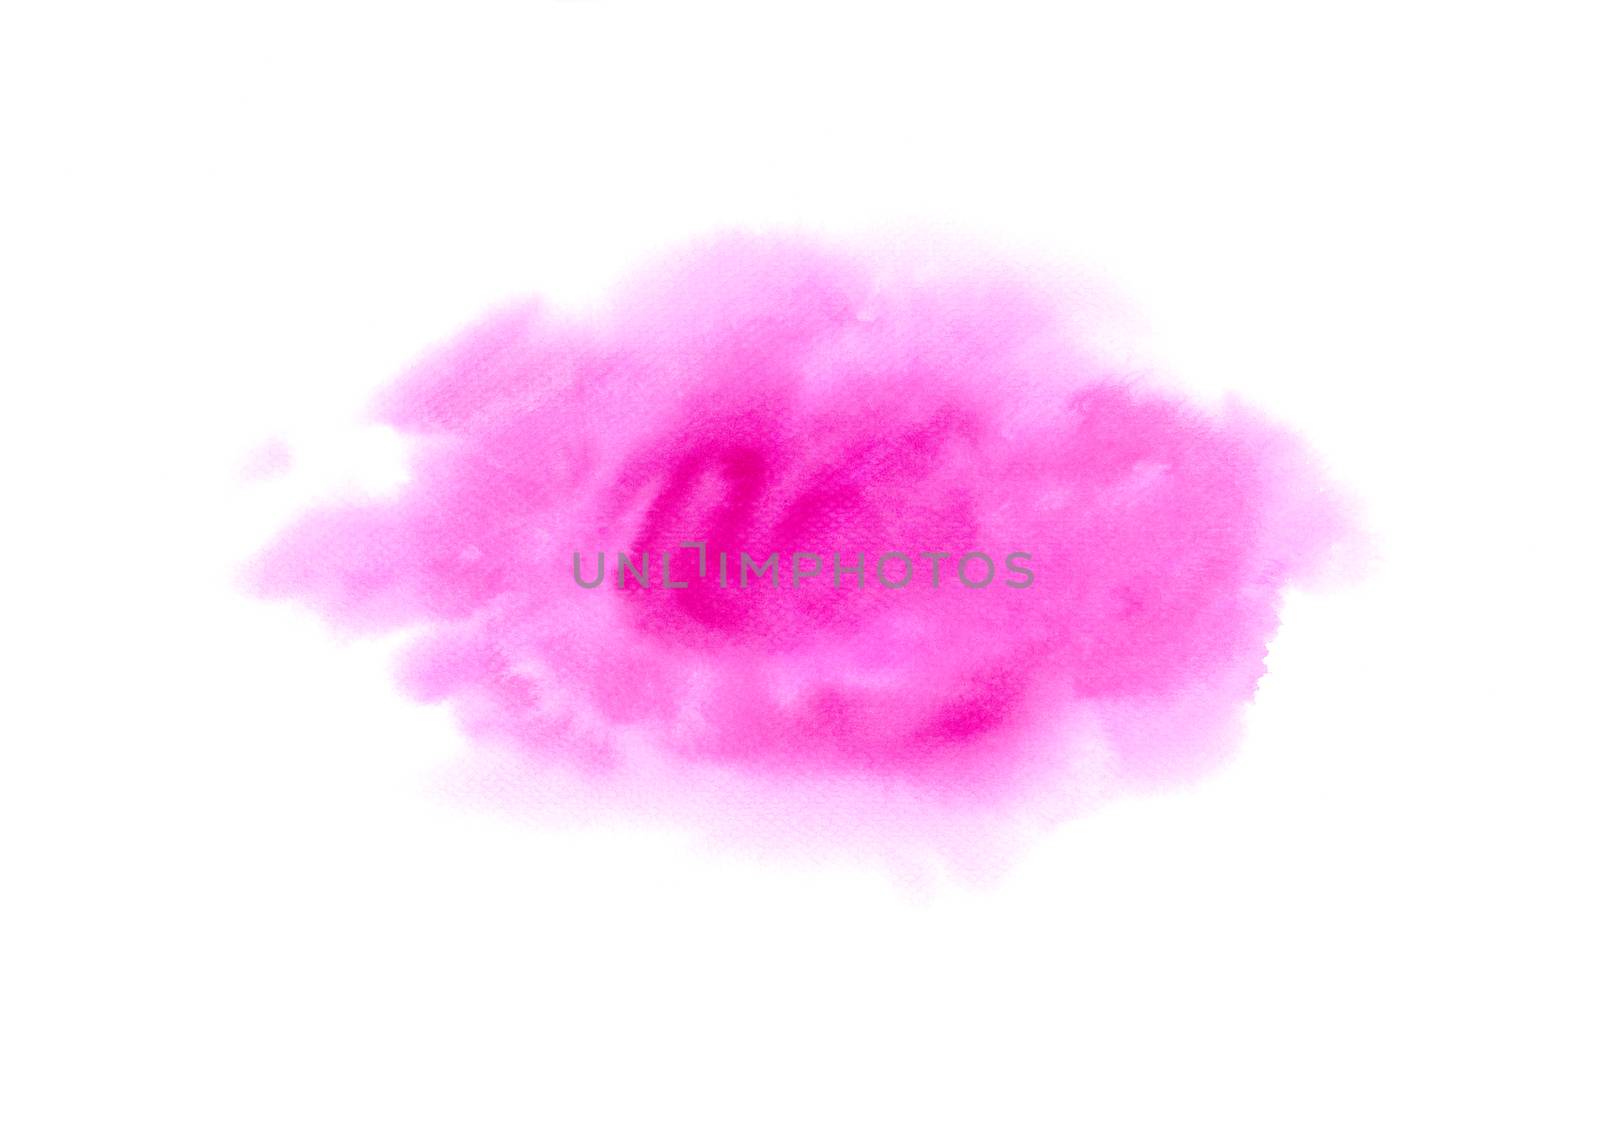 Romantic sweet charming pink abstract background. Watercolor hand painting illustration. Design element for wallpaper, packaging, banner, poster, flyer. by Ungamrung